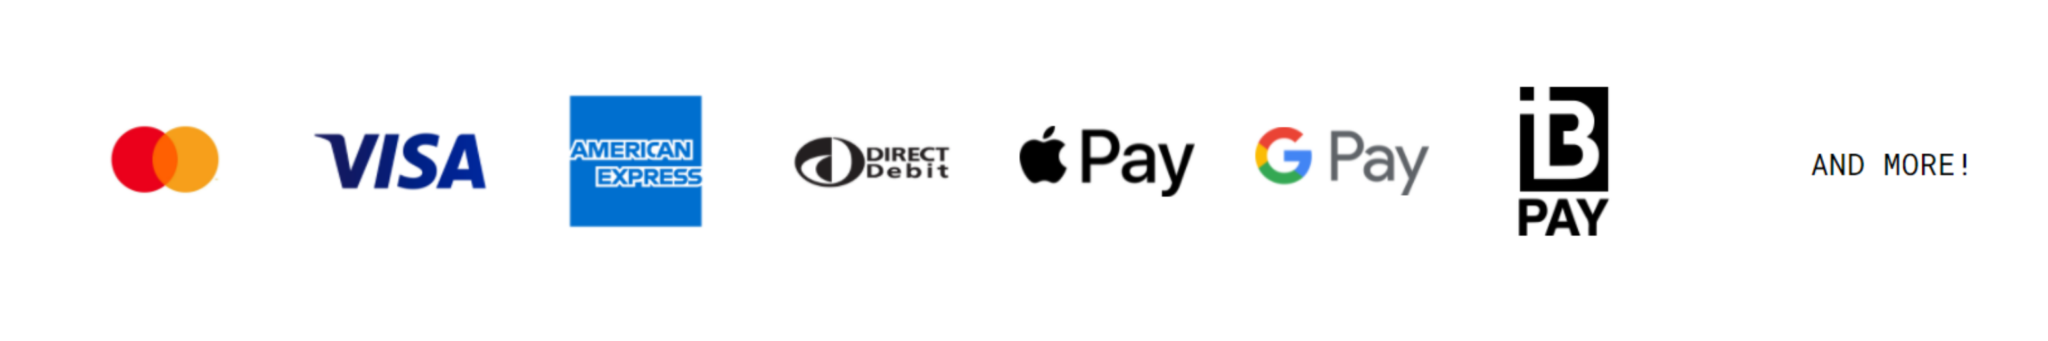 All-In-One Payment API for SaaS Platforms - Payrix Australia